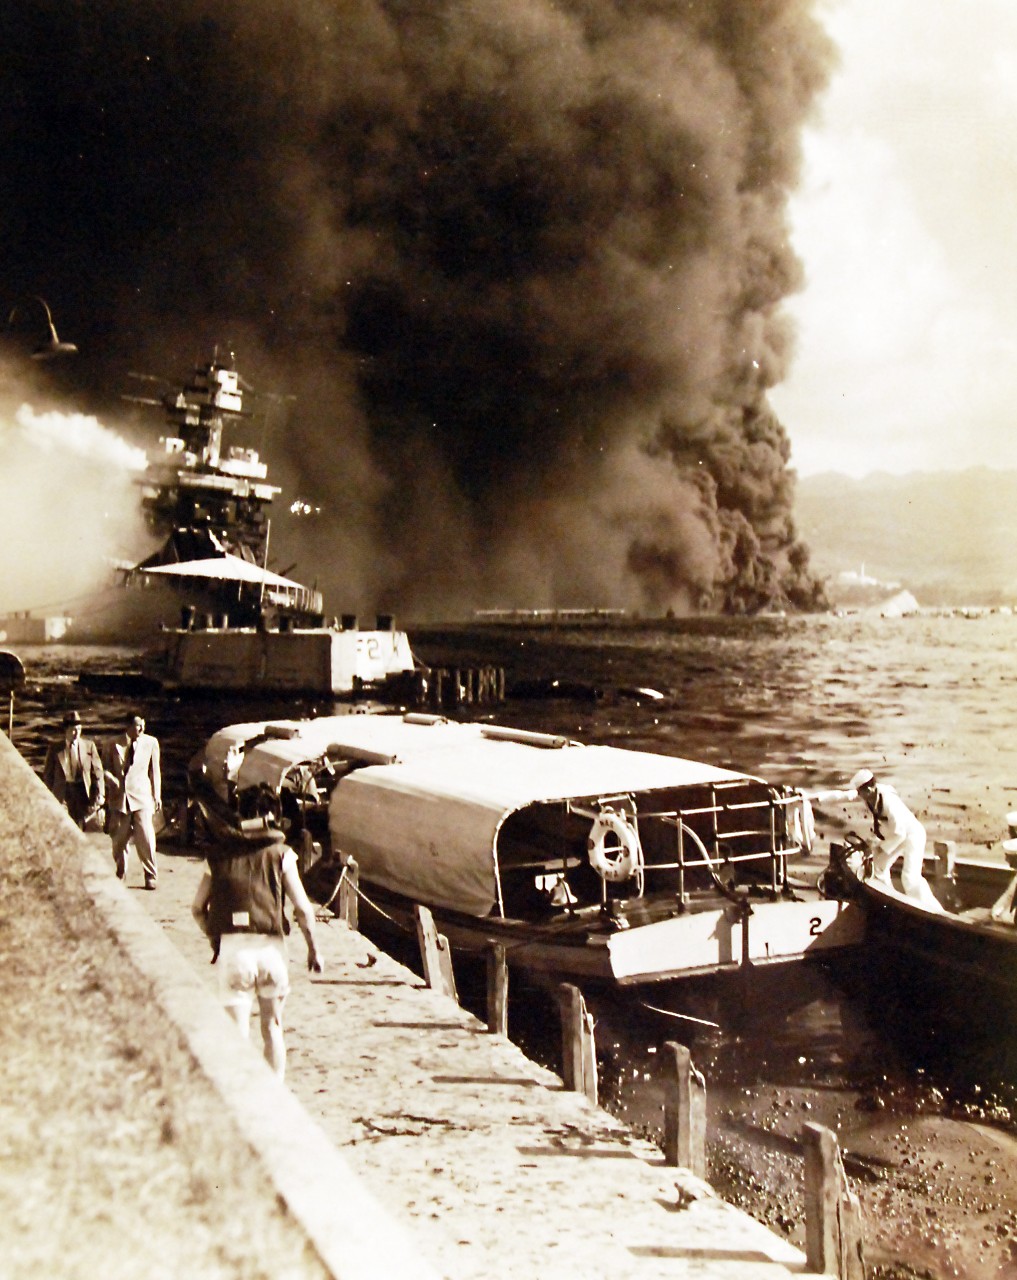 80-G-32947:   Japanese Attack on Pearl Harbor Attack, 7 December 1941.    Burning and damaged ships at Pearl Harbor after the Japanese attack.   Shown is USS California (BB 44), foreground, burning at Naval Air Station Ford Island.   USS Oklahoma (BB 37) is shown capsized in the background.  U.S. Navy photograph, now in the collections of the National Archives.   (9/13/2013).